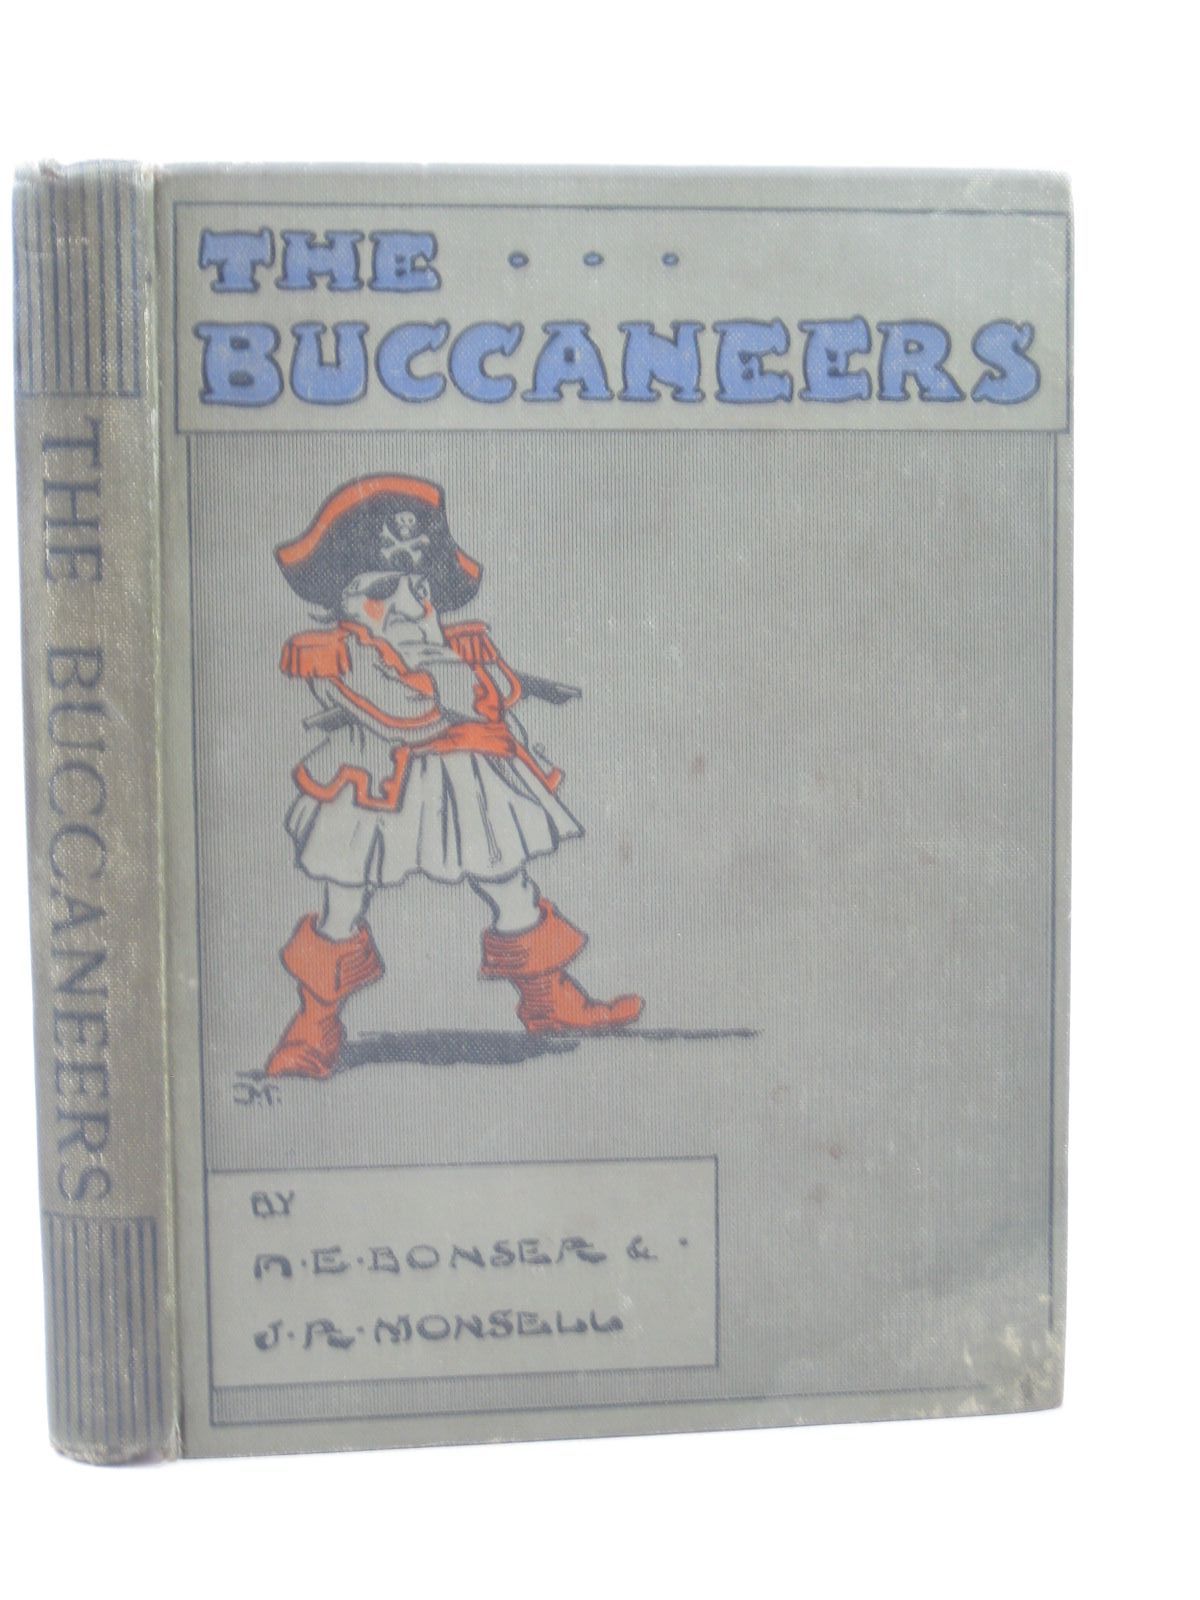 Photo of THE BUCCANEERS - A TALE OF THE SPANISH MAIN written by Bonser, A.E. illustrated by Monsell, J.R. published by Duckworth &amp; Co. (STOCK CODE: 1503997)  for sale by Stella & Rose's Books